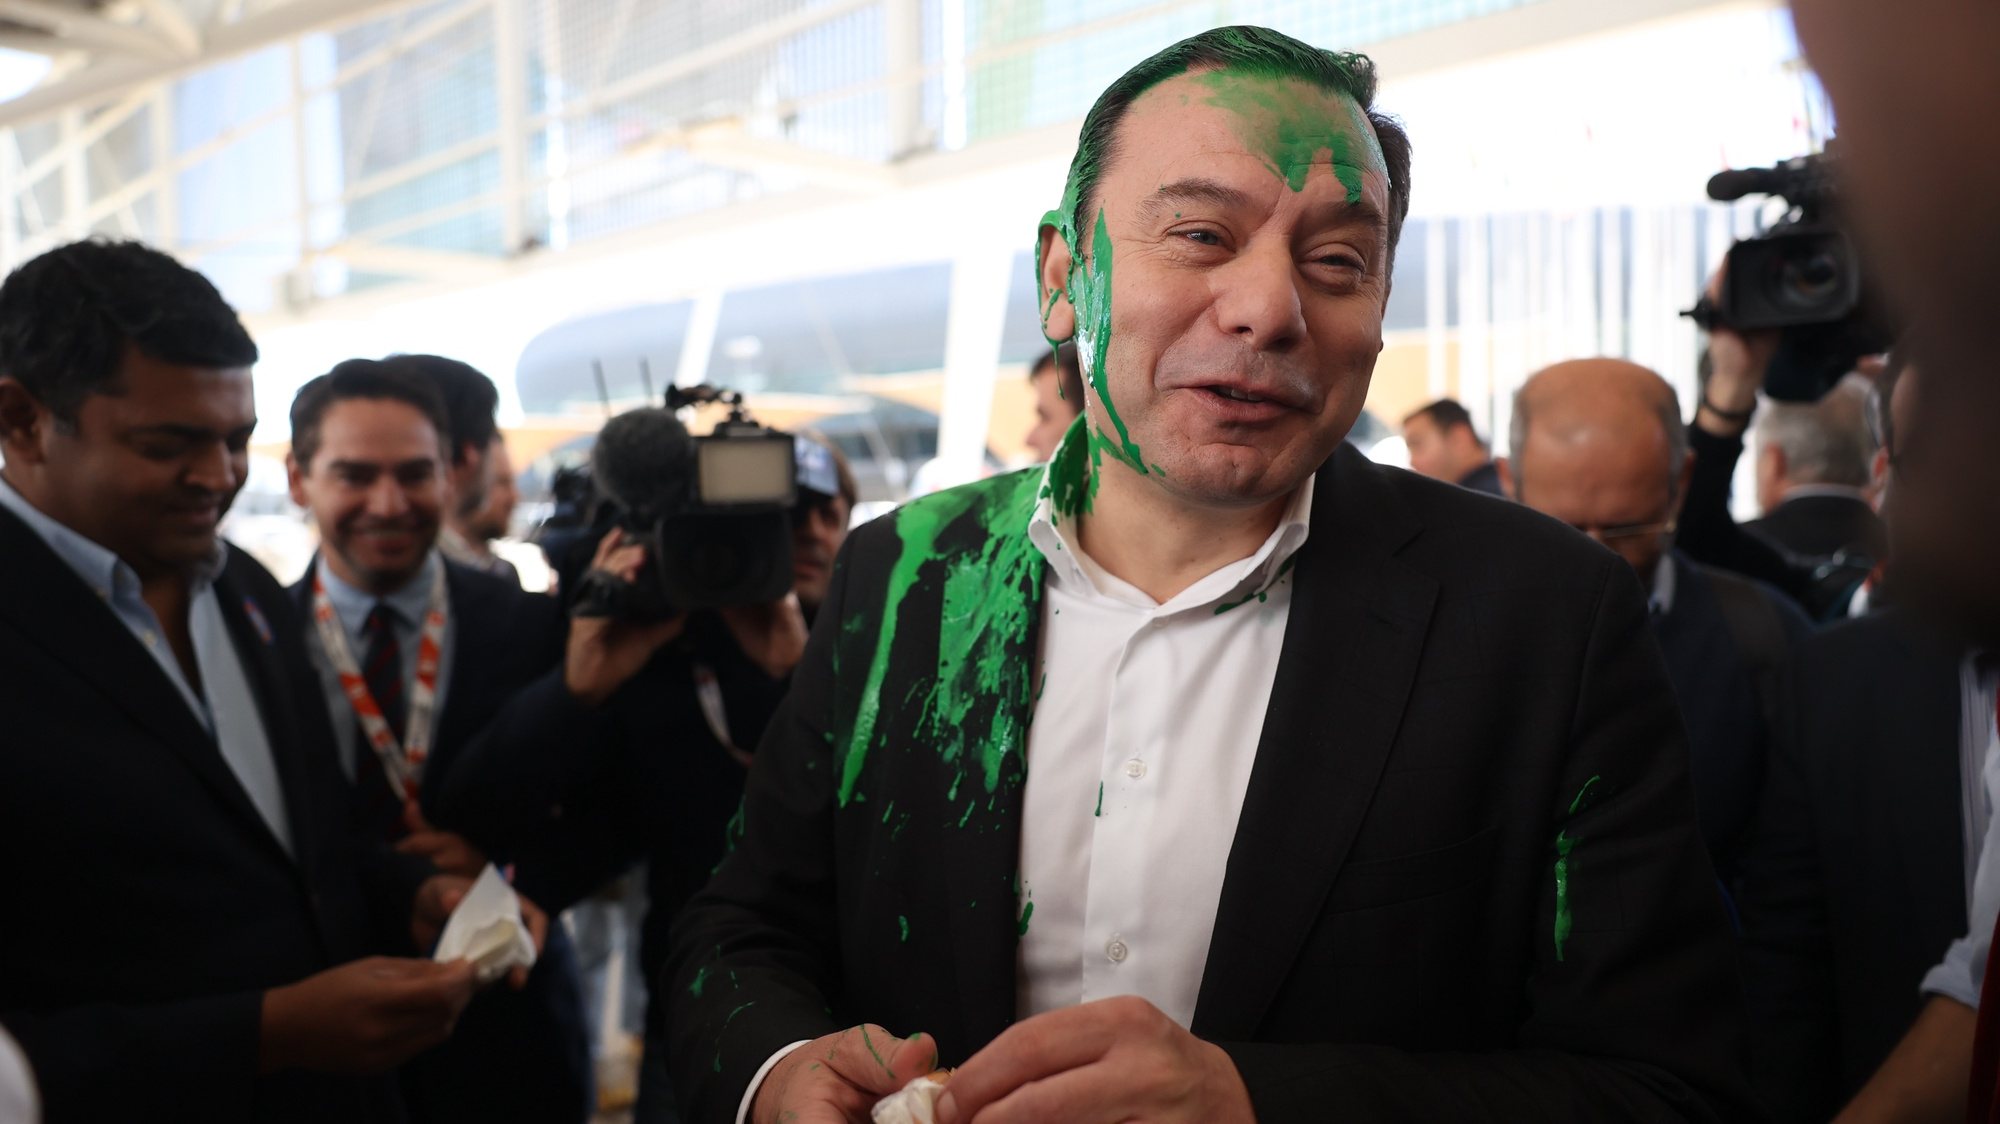 The president of the Democratic Social Party (PSD) Luis Montenegro (C) reacts after being hit with paint at his arrival at the Lisbon Tourism Fair (BTL) during a Democratic Alliance (AD) campaign, as part of the campaign for upcoming legislative elections, in Lisbon, Portugal, 28 February 2024. On January 15, the President of the Republic decreed the dissolution of parliament and the calling of early legislative elections on 10 March, following the resignation of Prime Minister Antonio Costa presented on 07 November 2023. ANDRE KOSTERS/LUSA